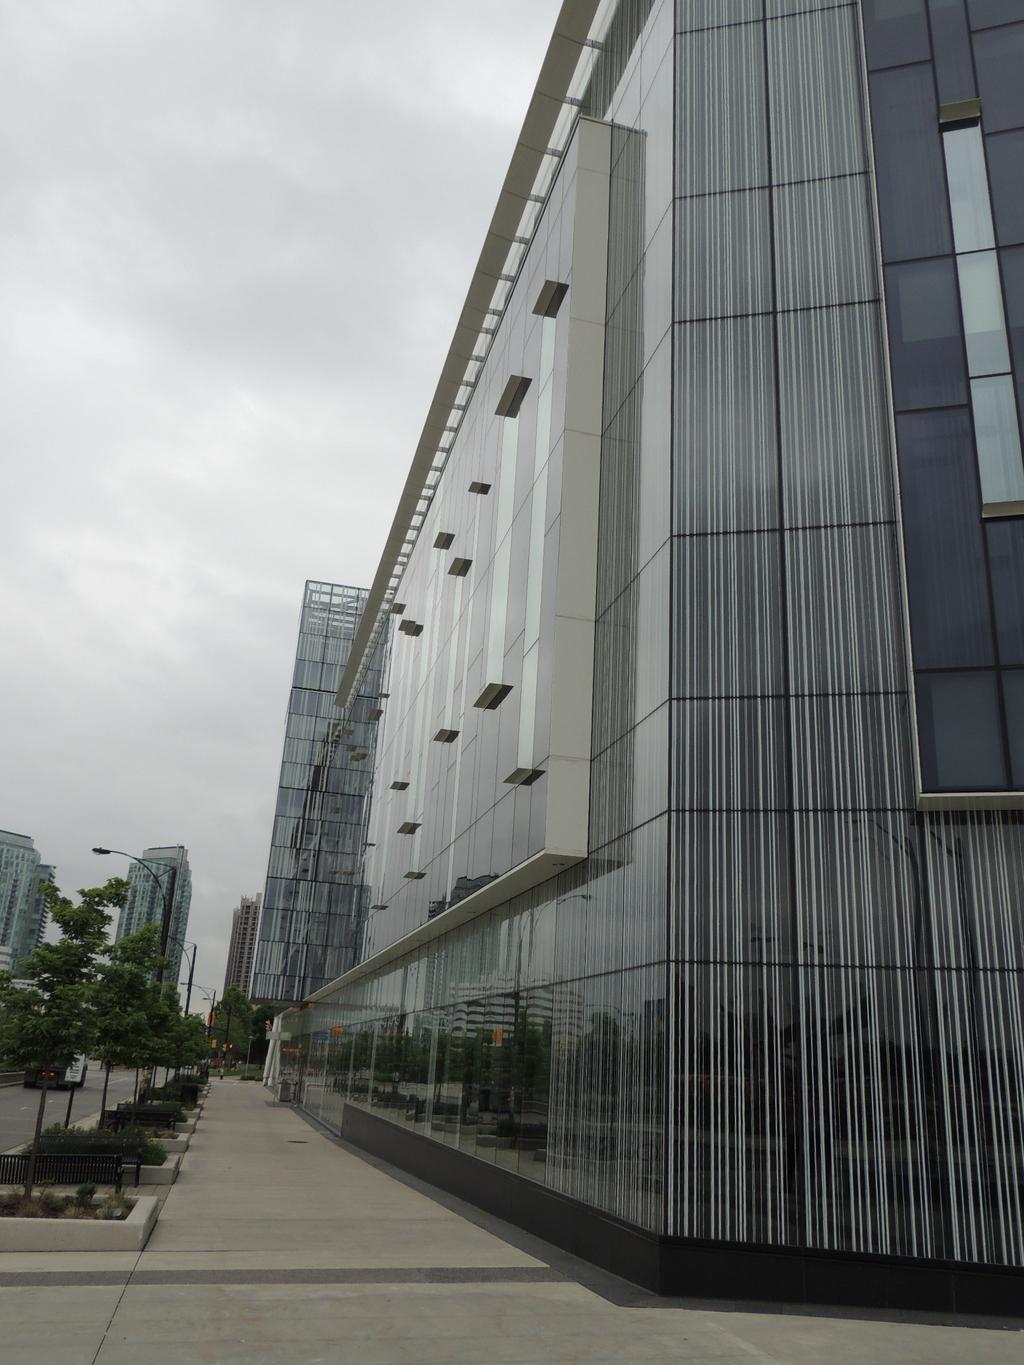 5 Exterior Building Design 5.1 Bird Friendly Glazing Glass on buildings should be treated with a density pattern between 10-28 cm (4 to 11 in.) apart for a minimum of the first 10 to12 m (33-40 ft.